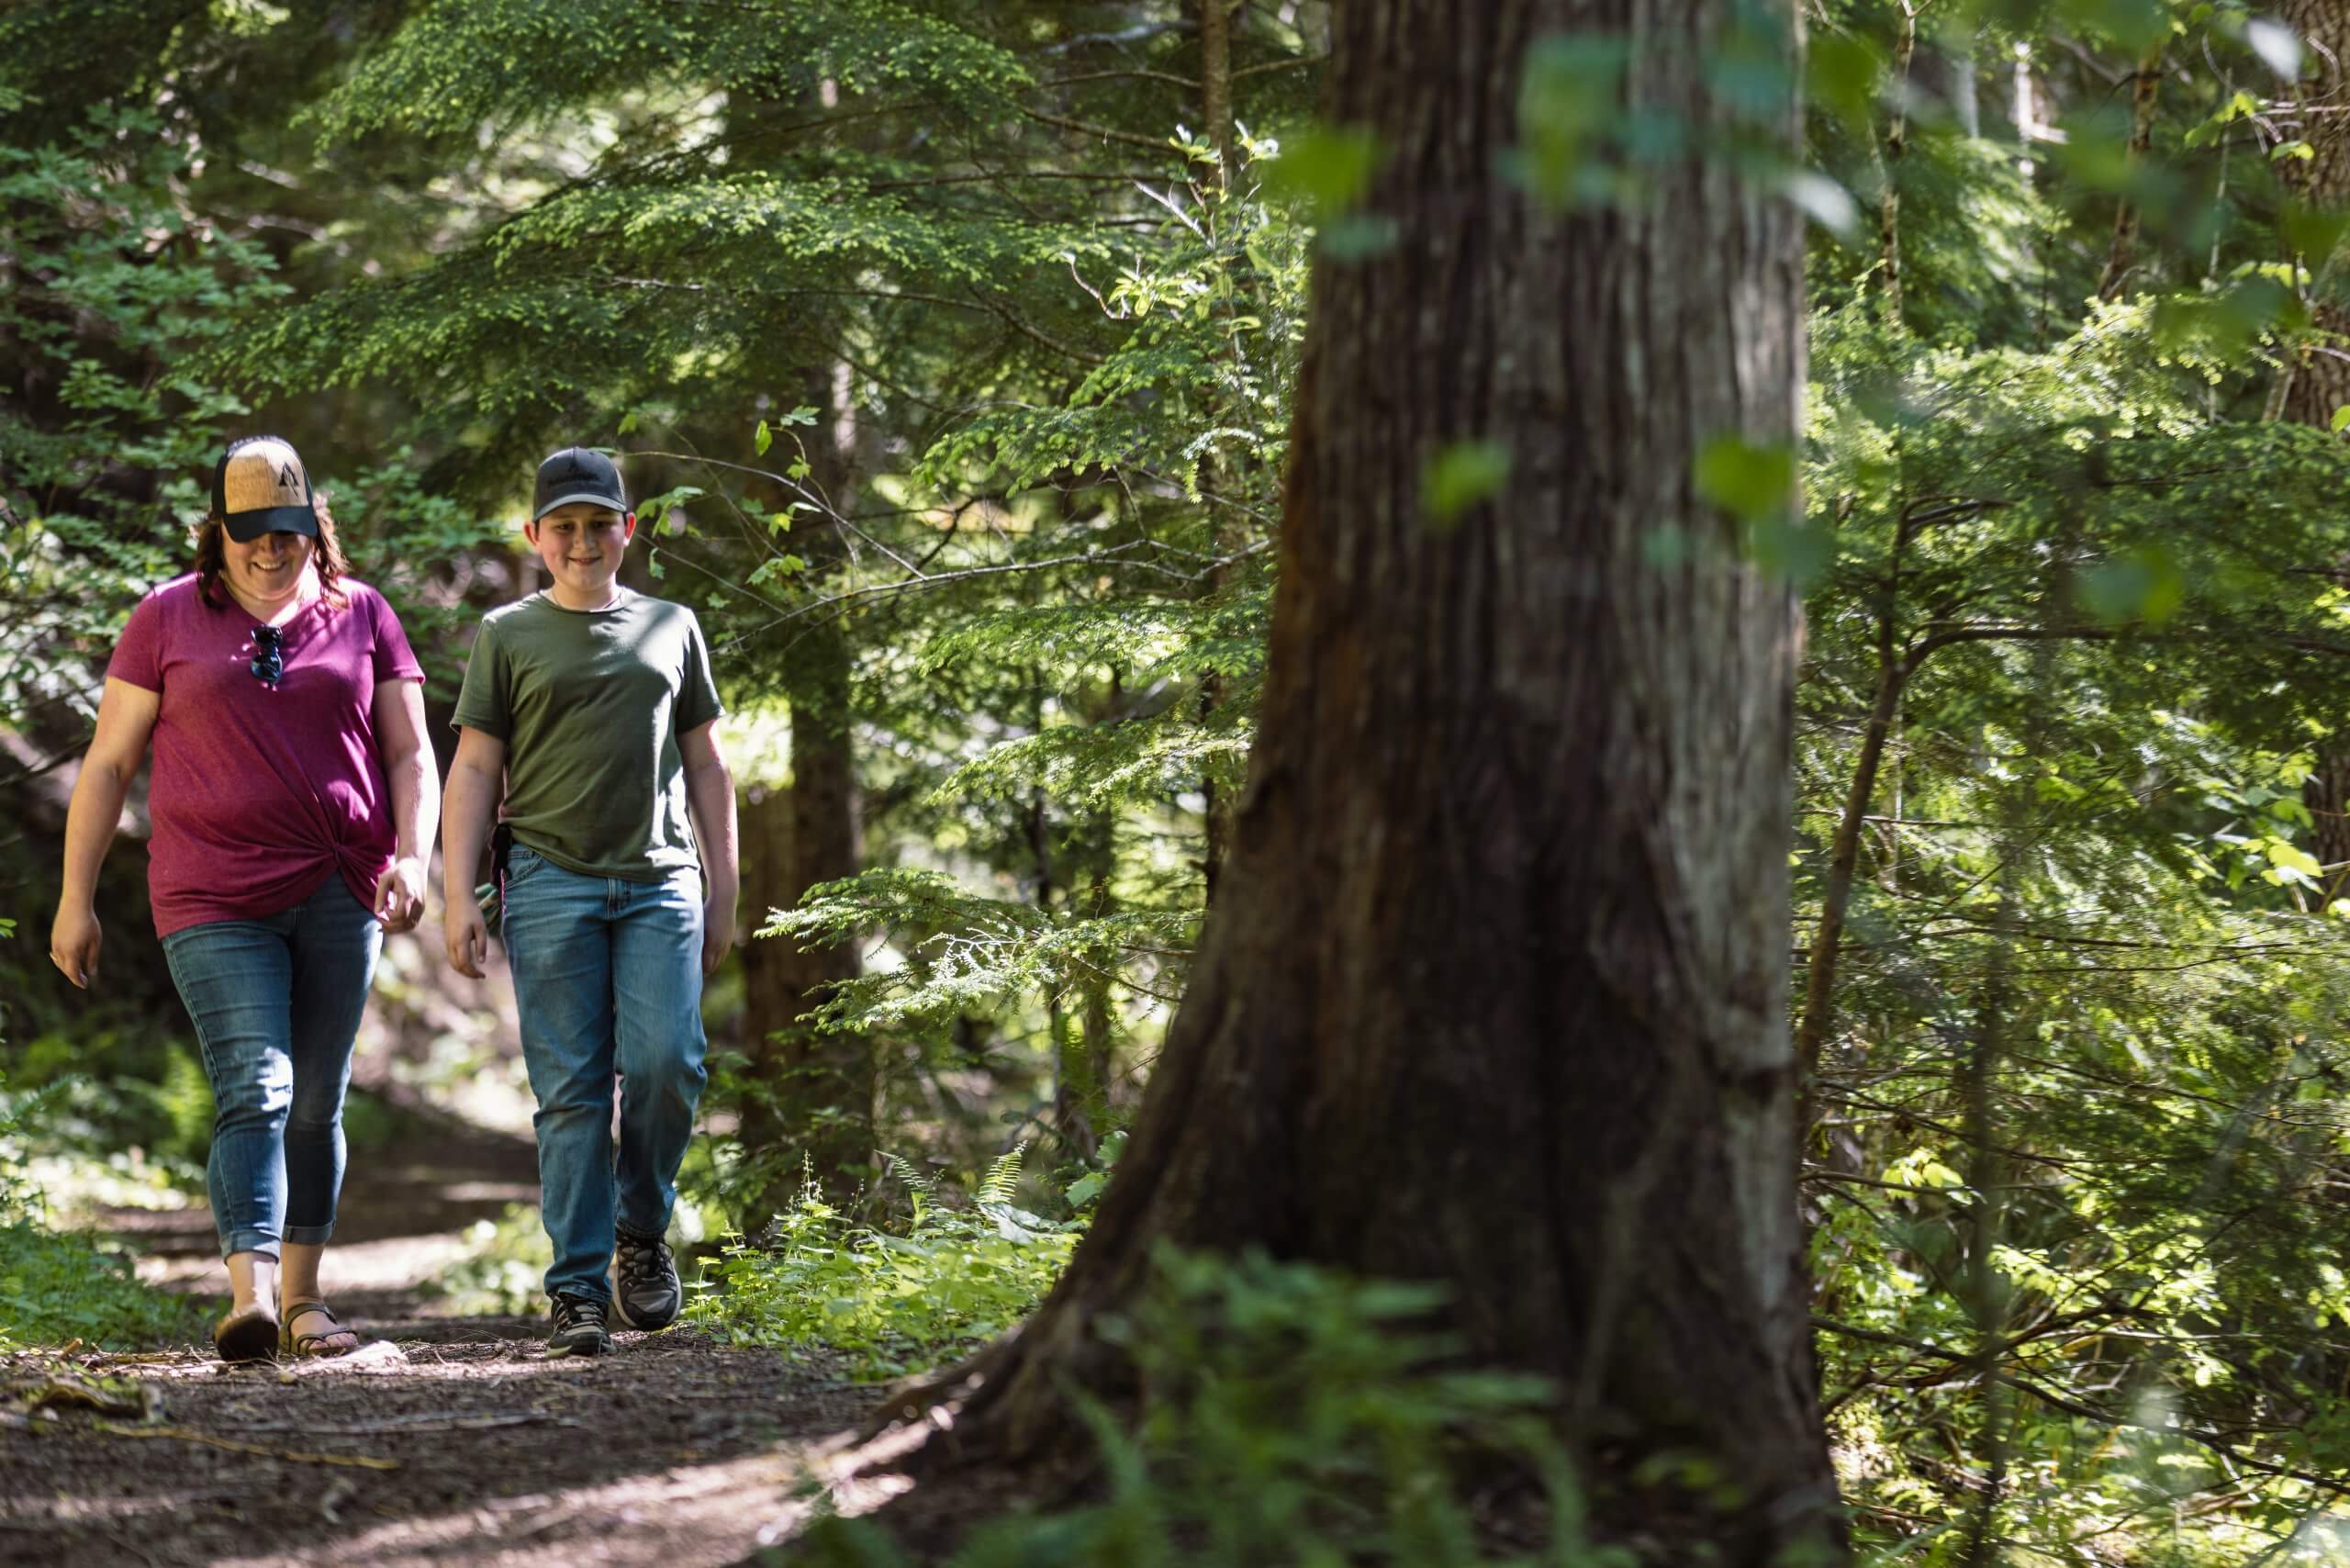 Two people hiking along a forested trail.